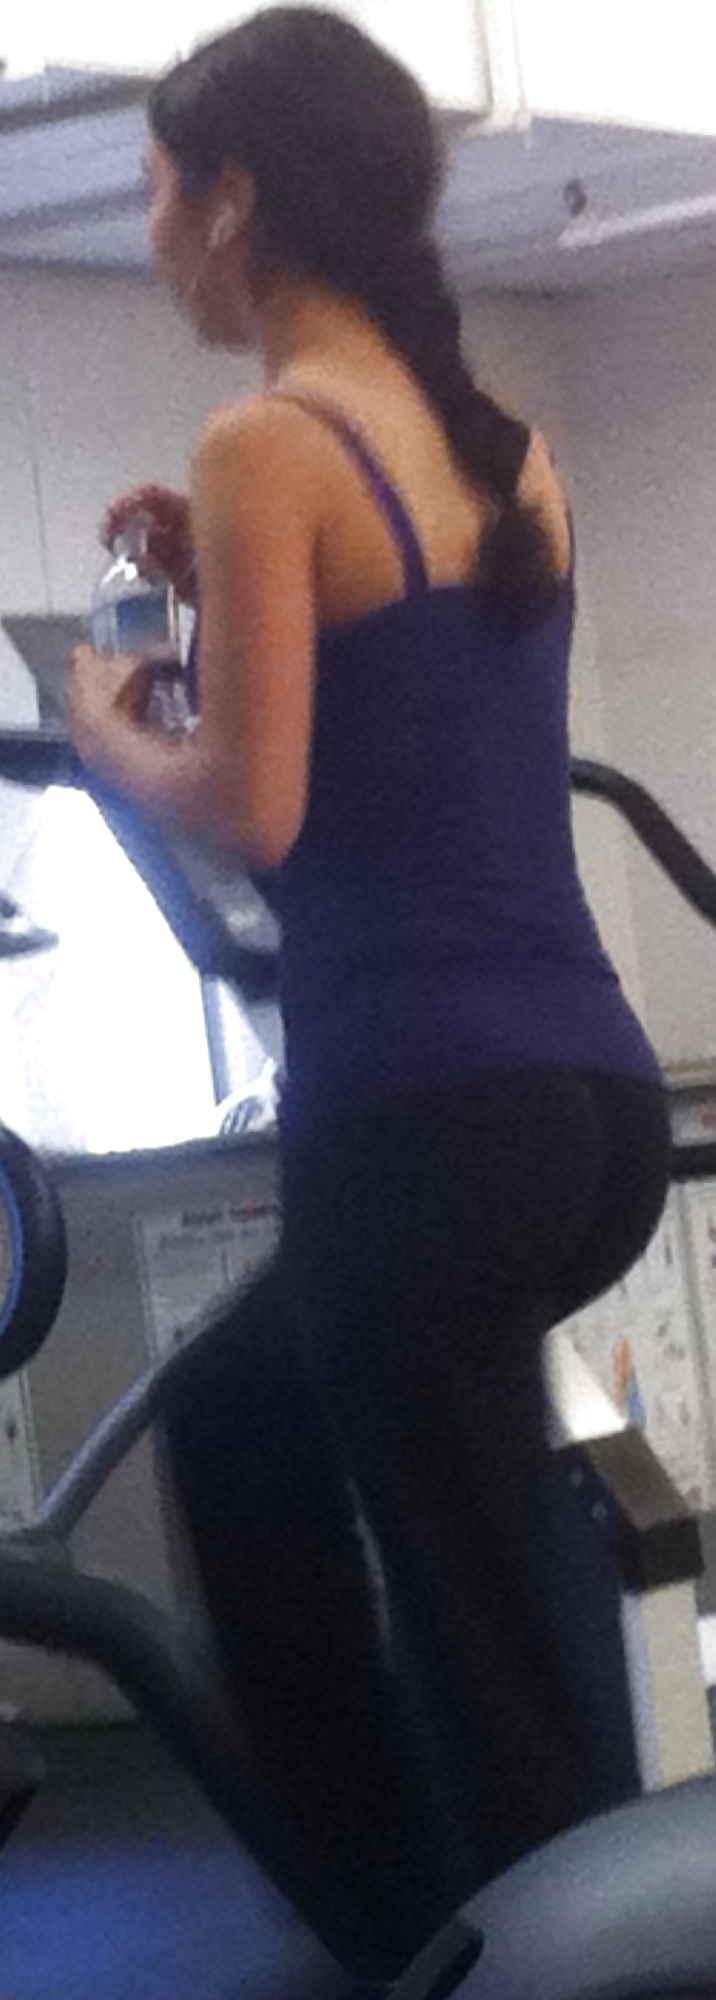 Candid Brunette Working Out In Spandex #10361155